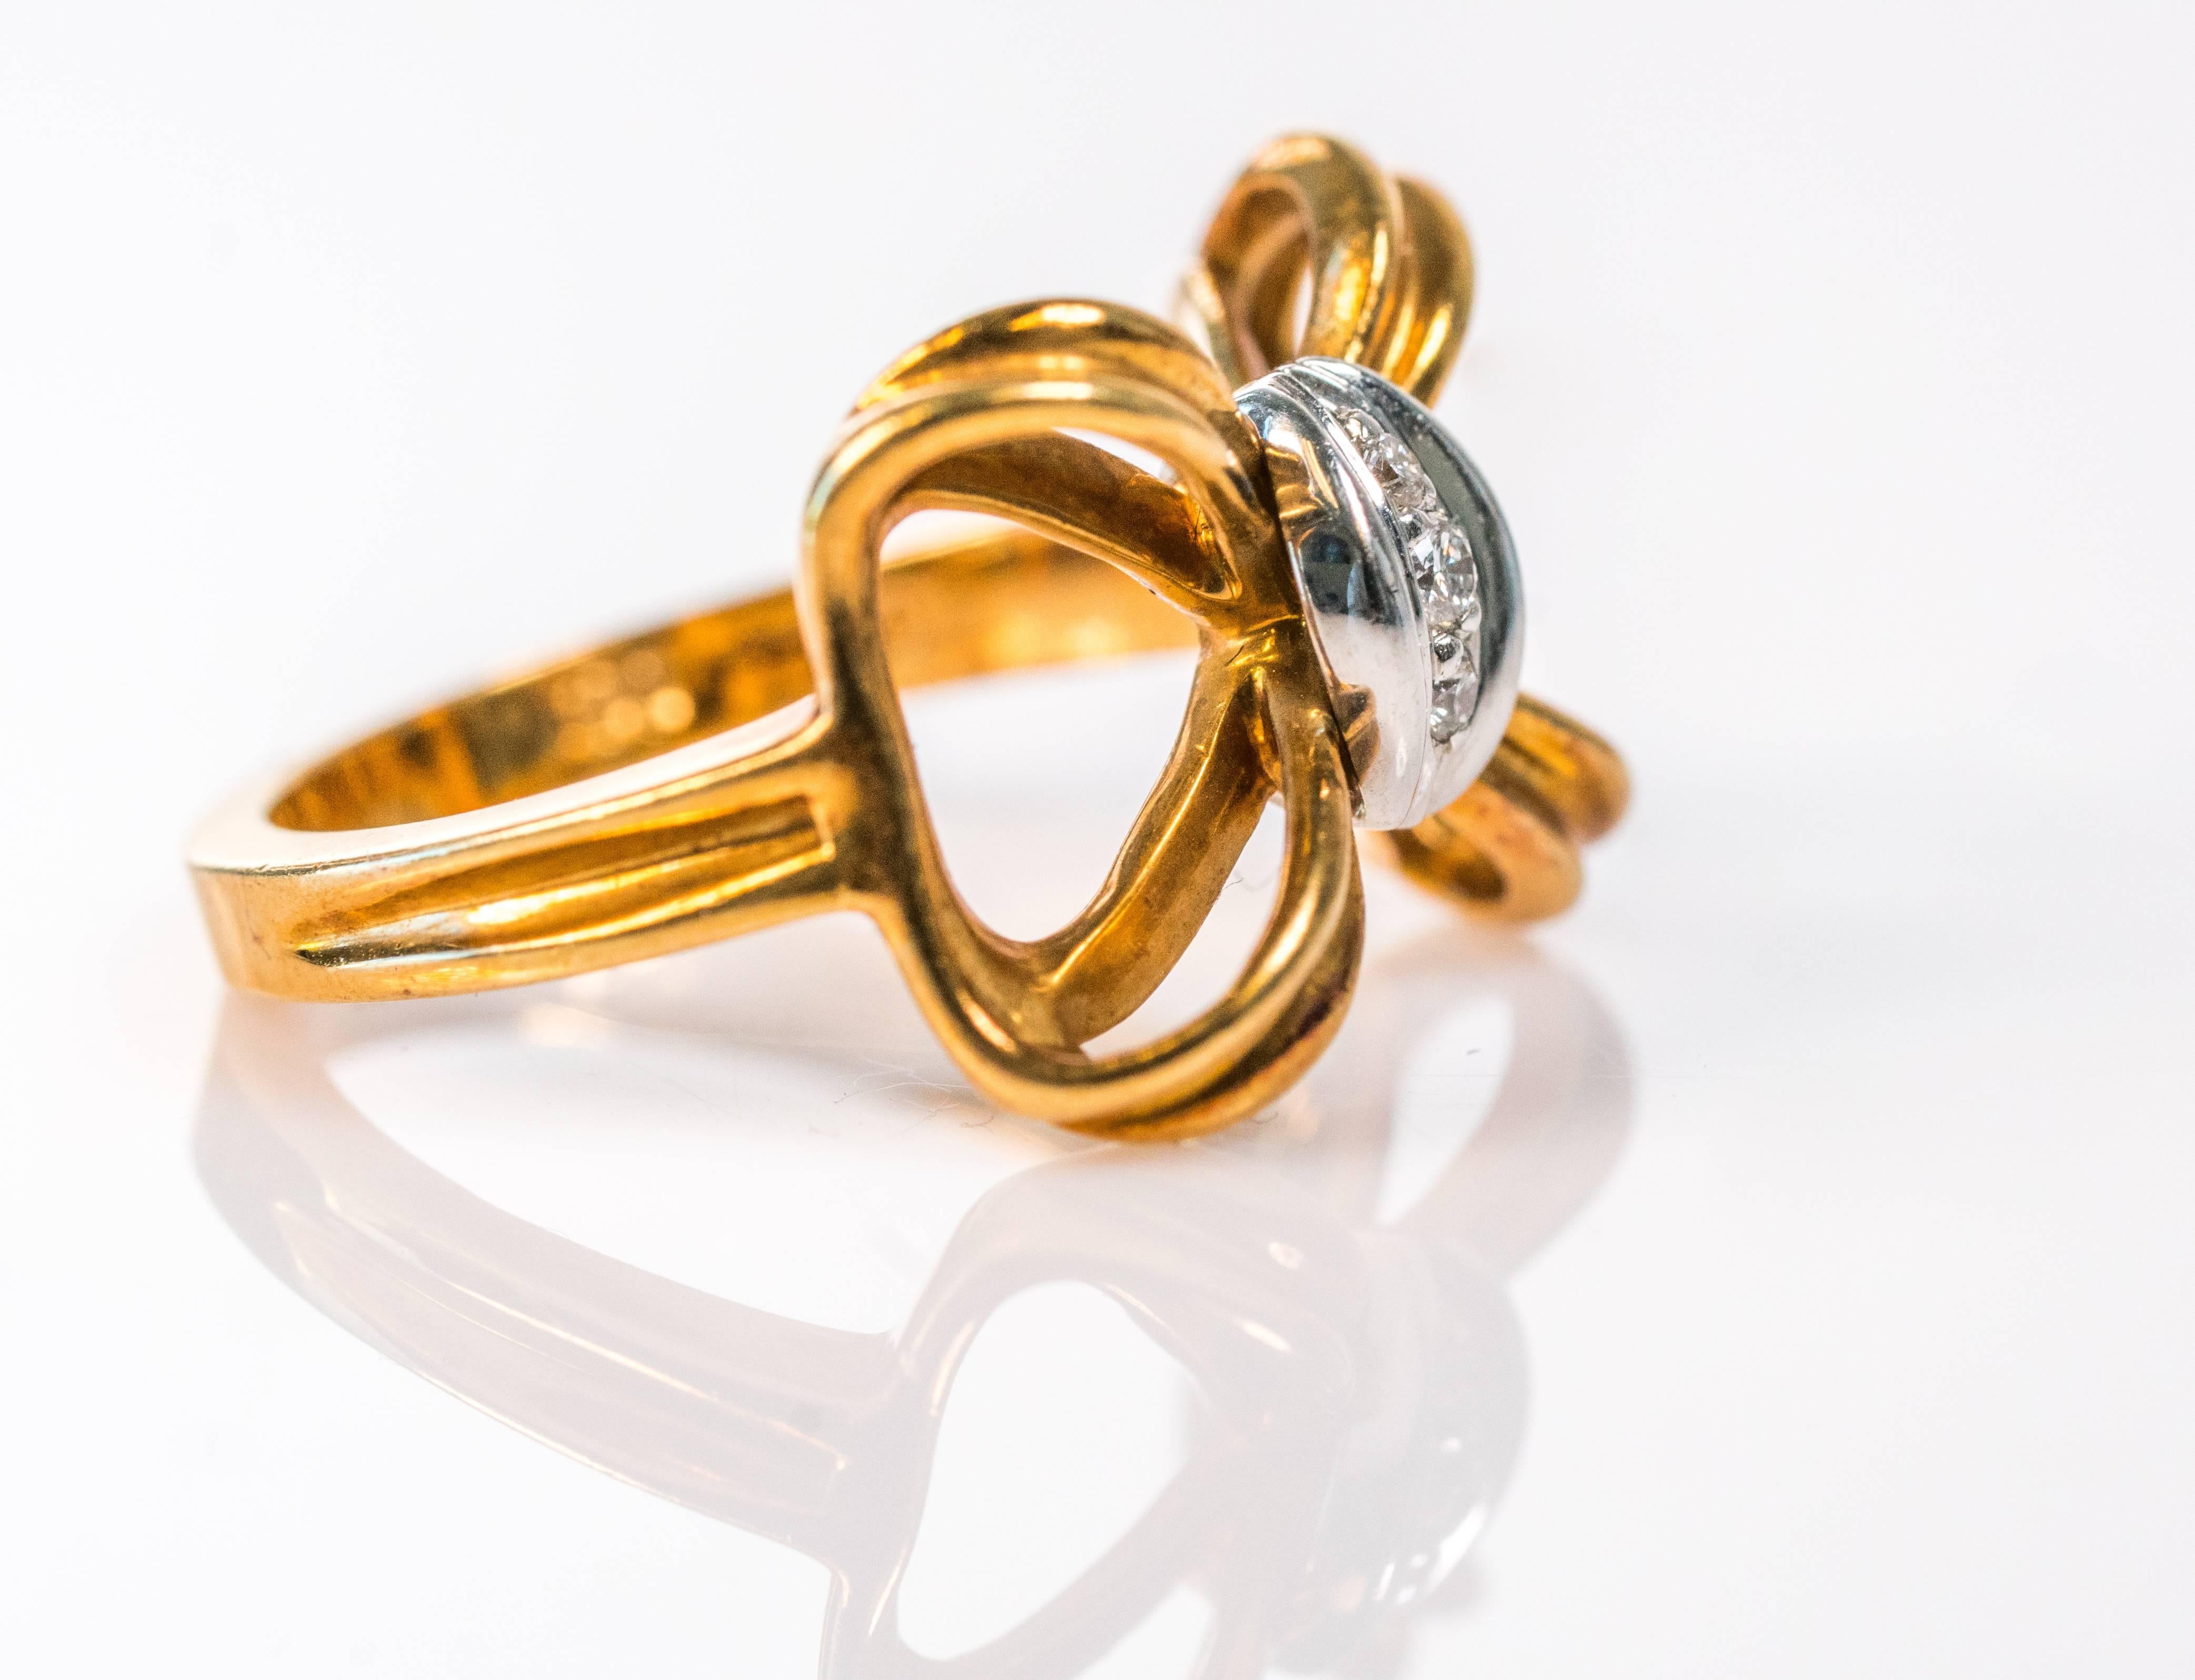 This 1980s Vintage Tiffany and Co. Bow Ring is made from 18 karat yellow gold. The center knot of the bow is made from platinum and is set with 3 round brilliant diamonds.  This ring is size 4.25. The inner shank is hallmarked Tiffany and Co. 750 PT